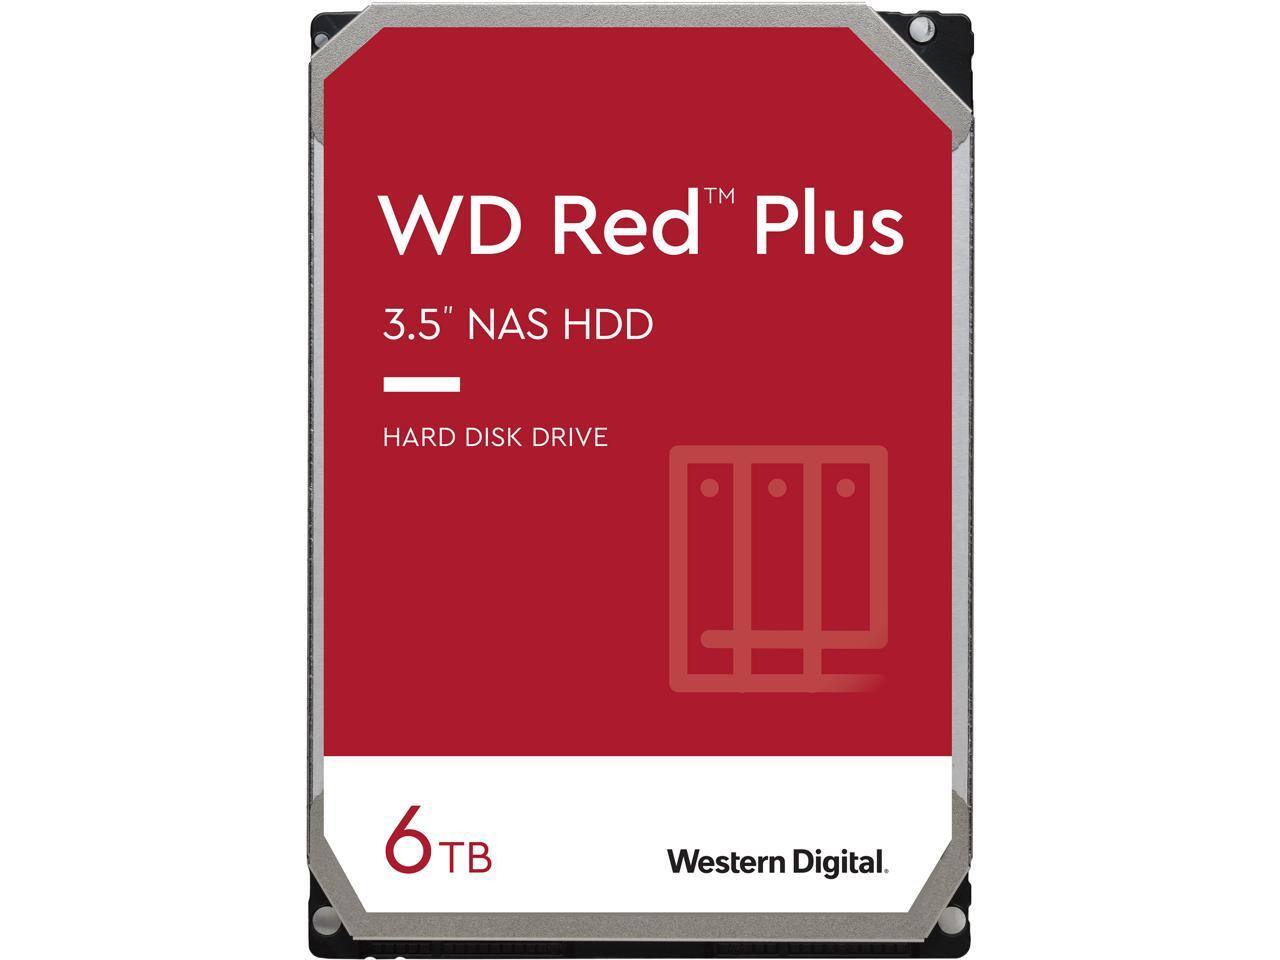 WD Red Plus 6TB NAS Hard Disk Drive [5640 RPM Class SATA 6Gb/s, CMR, 128MB Cache, 3.5"] for $134.99 w/ Free Shipping